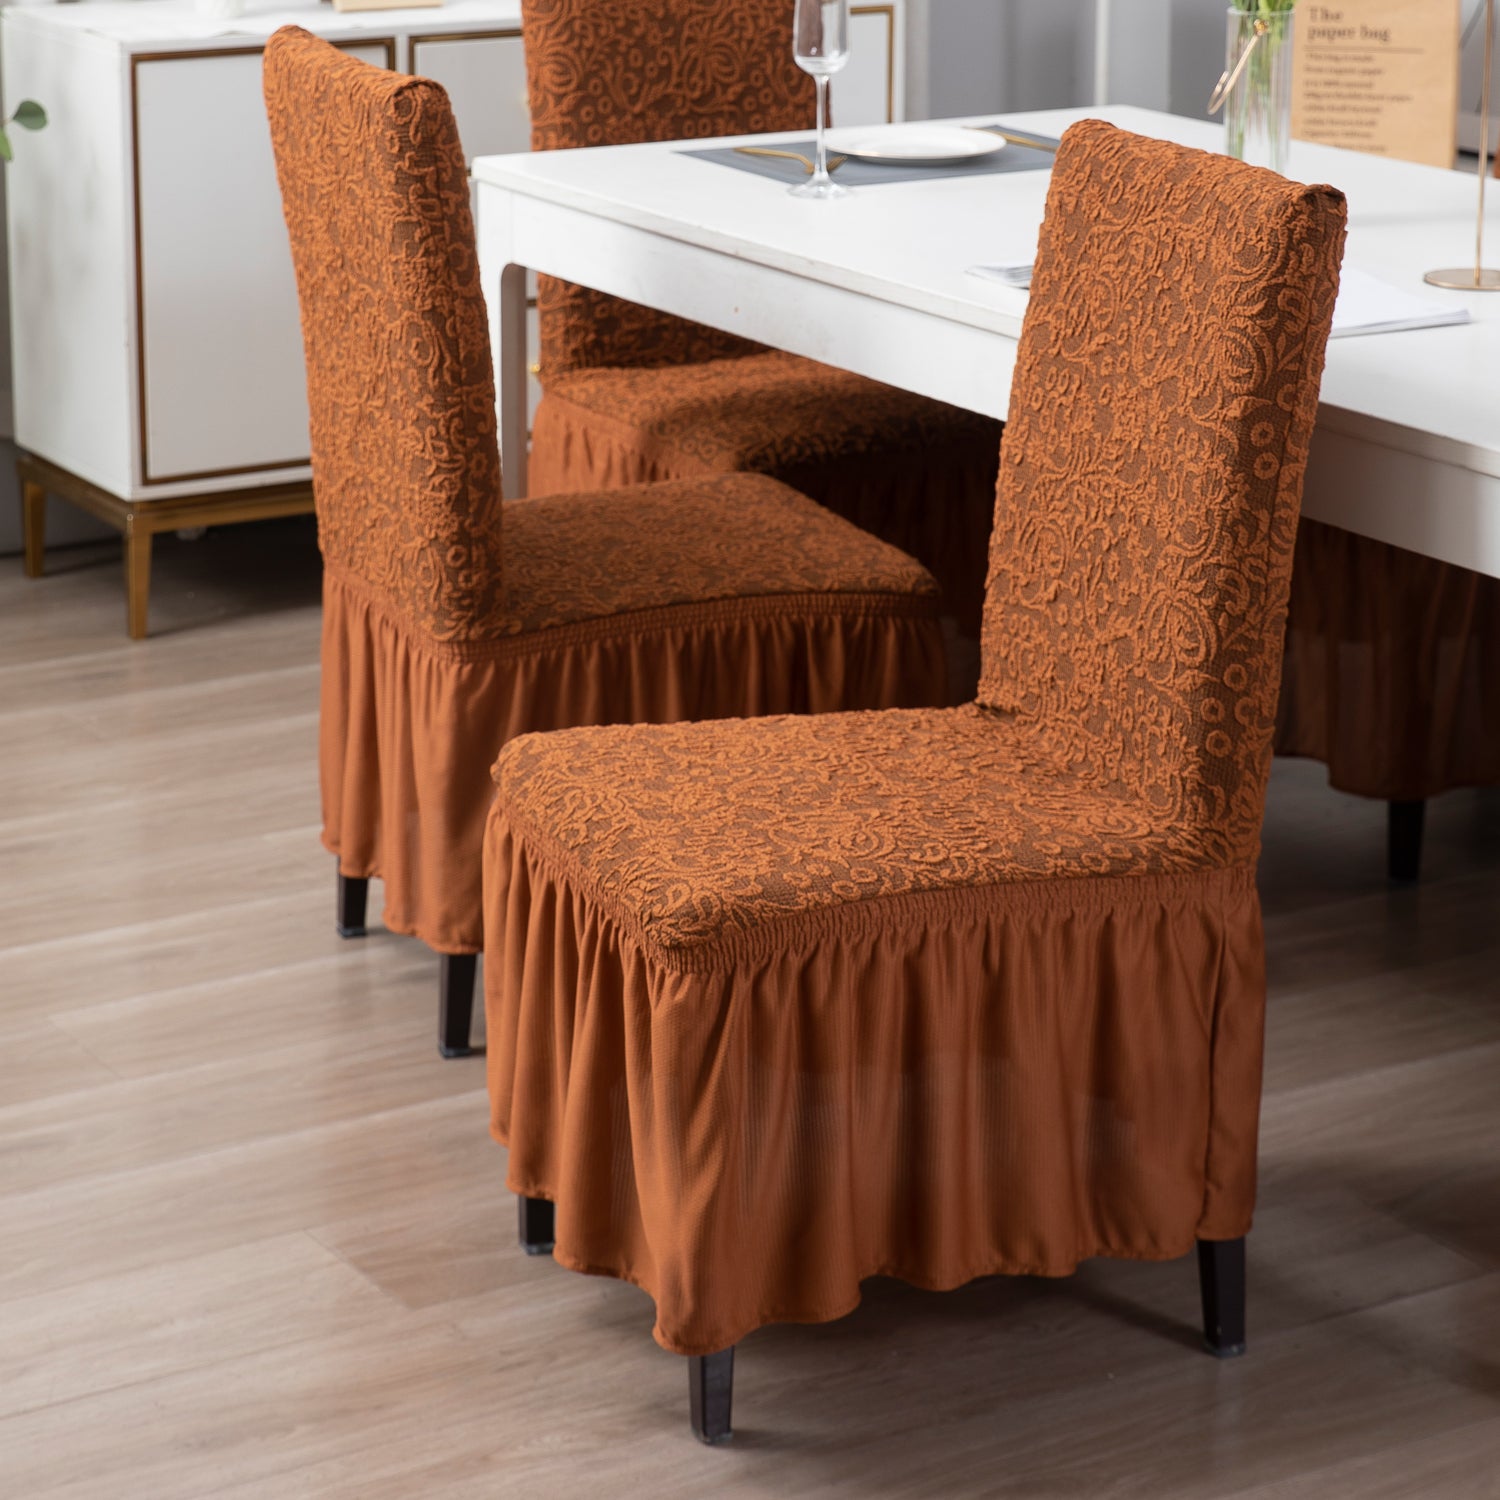 Elastic Stretchable Designer Woven Jacquard Dining Chair Cover with Frill, Caramel Brown